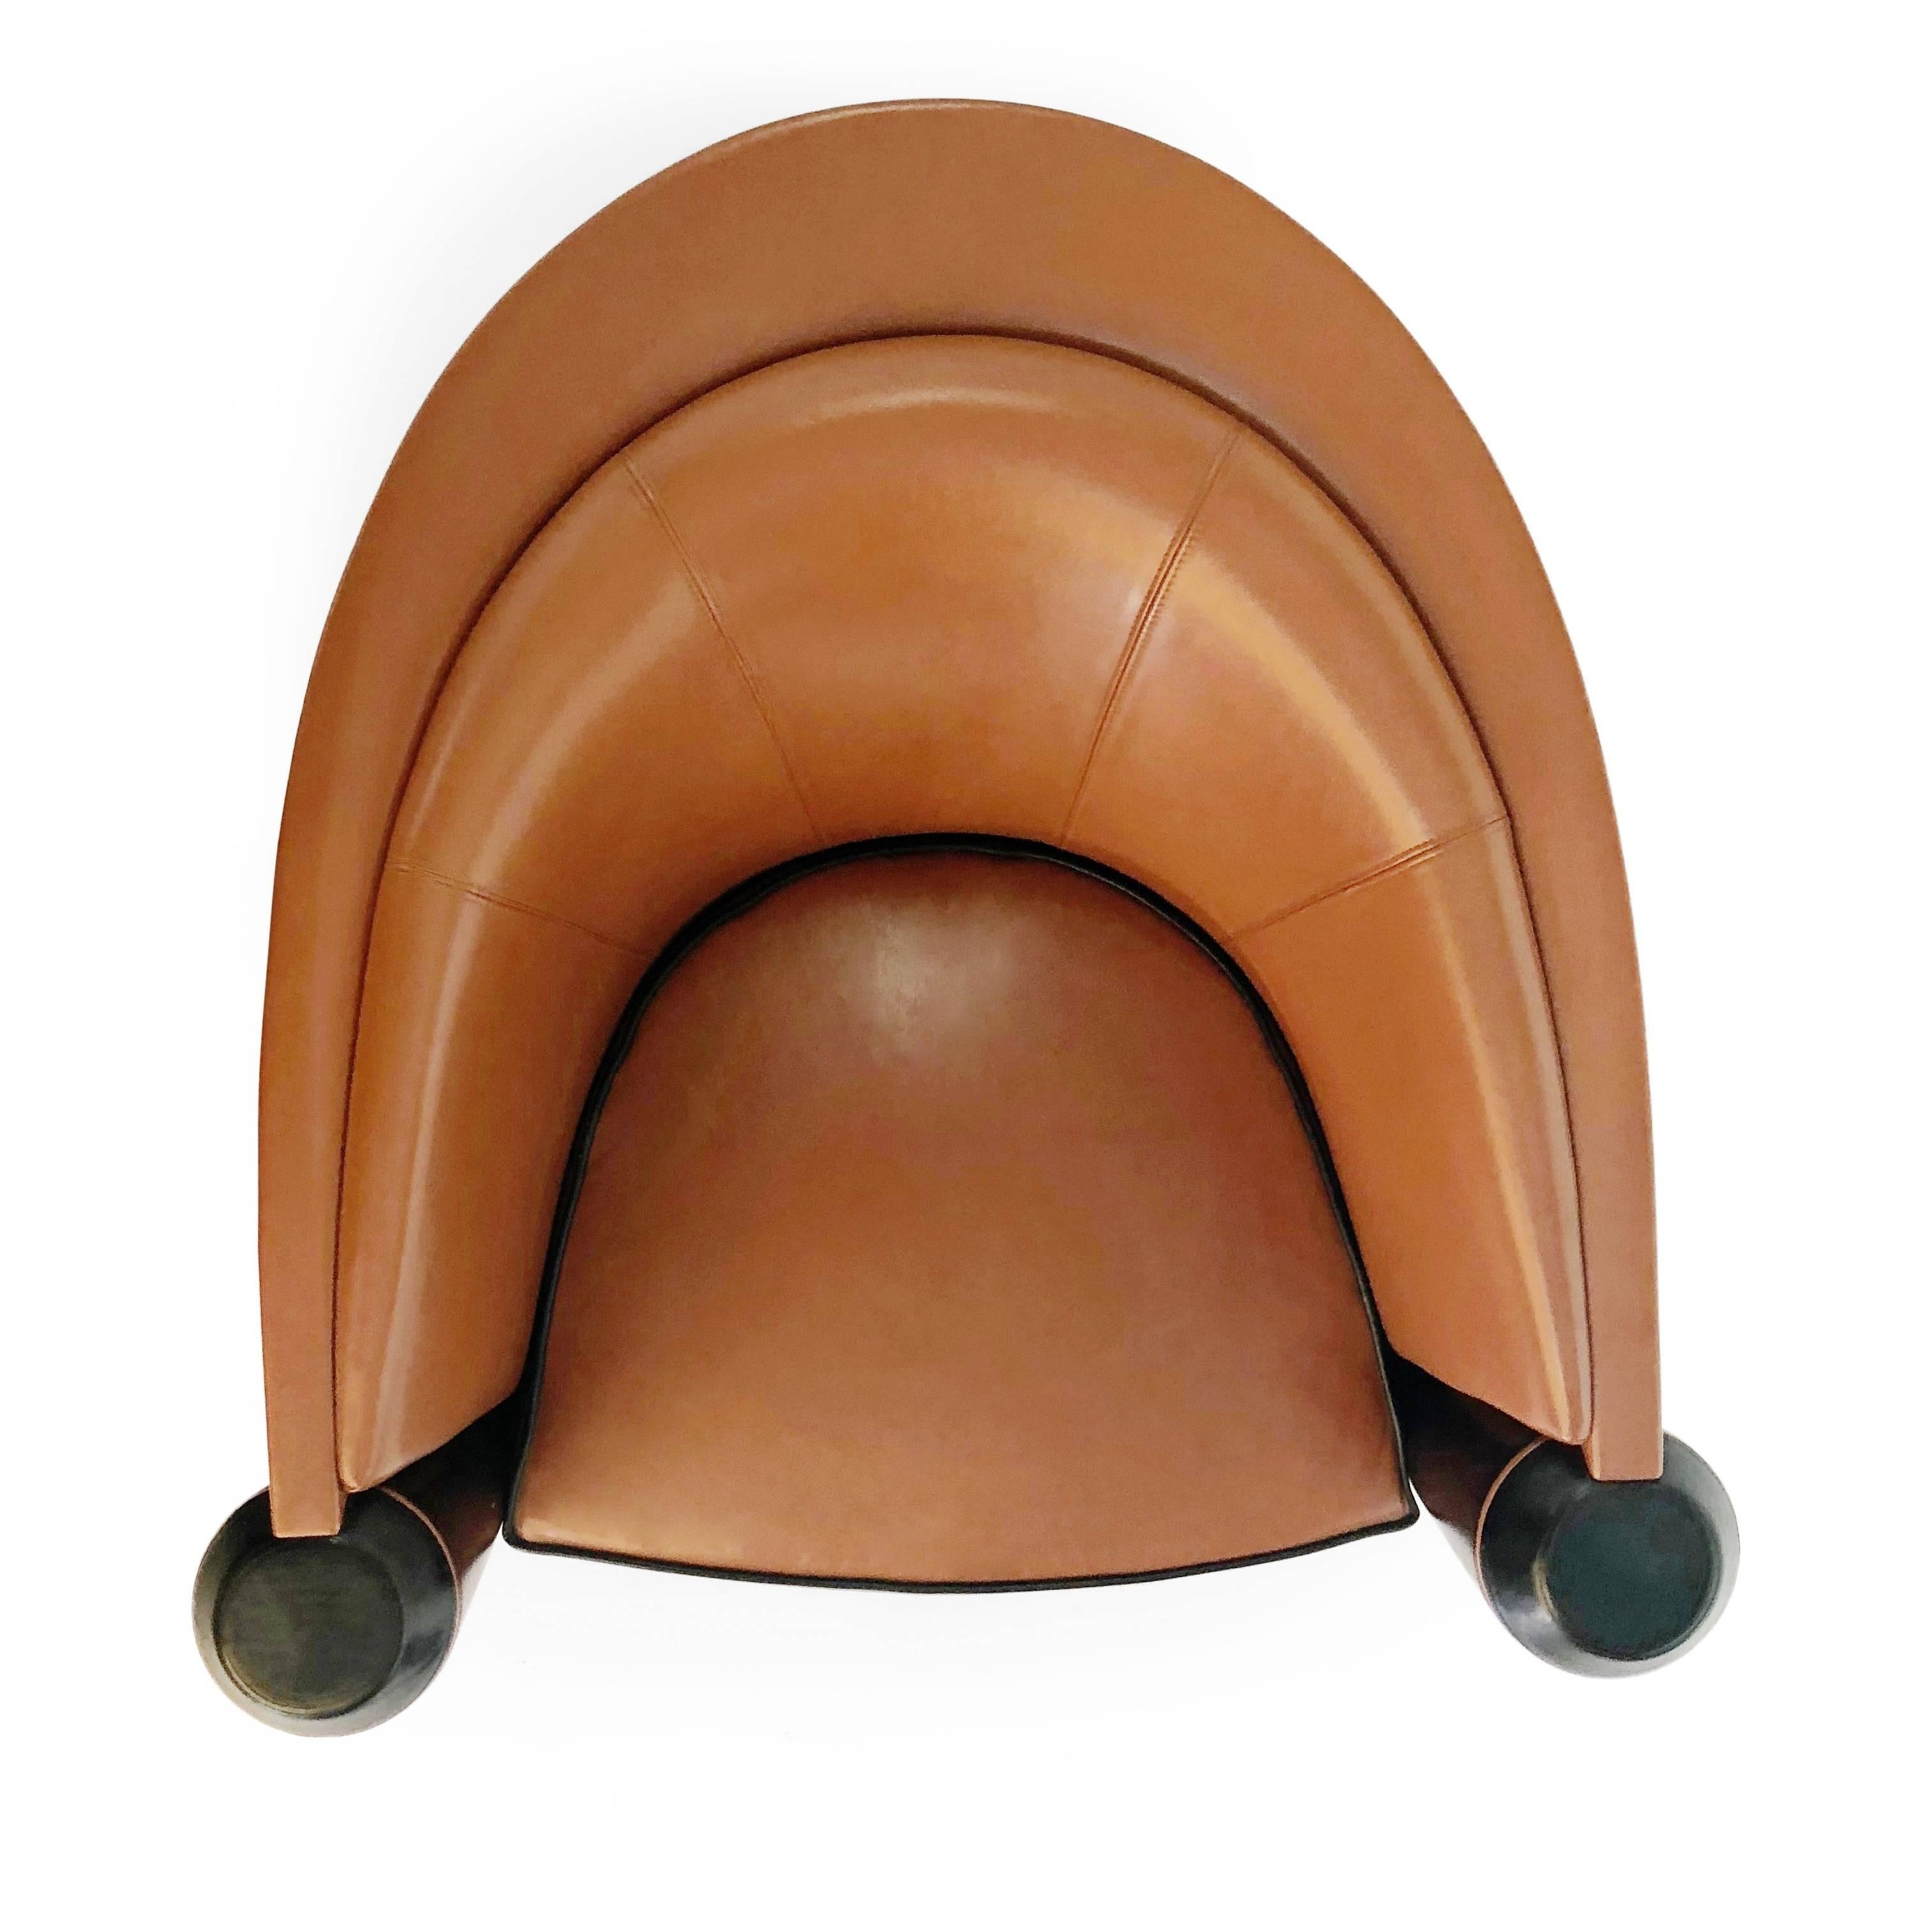 Handsome Art Deco style club chair by Adam Tihany for Pace Mariani, originally retailed for over $9,000. This Italian tub chair features a deeply curved back with two conical shaped armrests which reach down to the floor. These armrests have flat